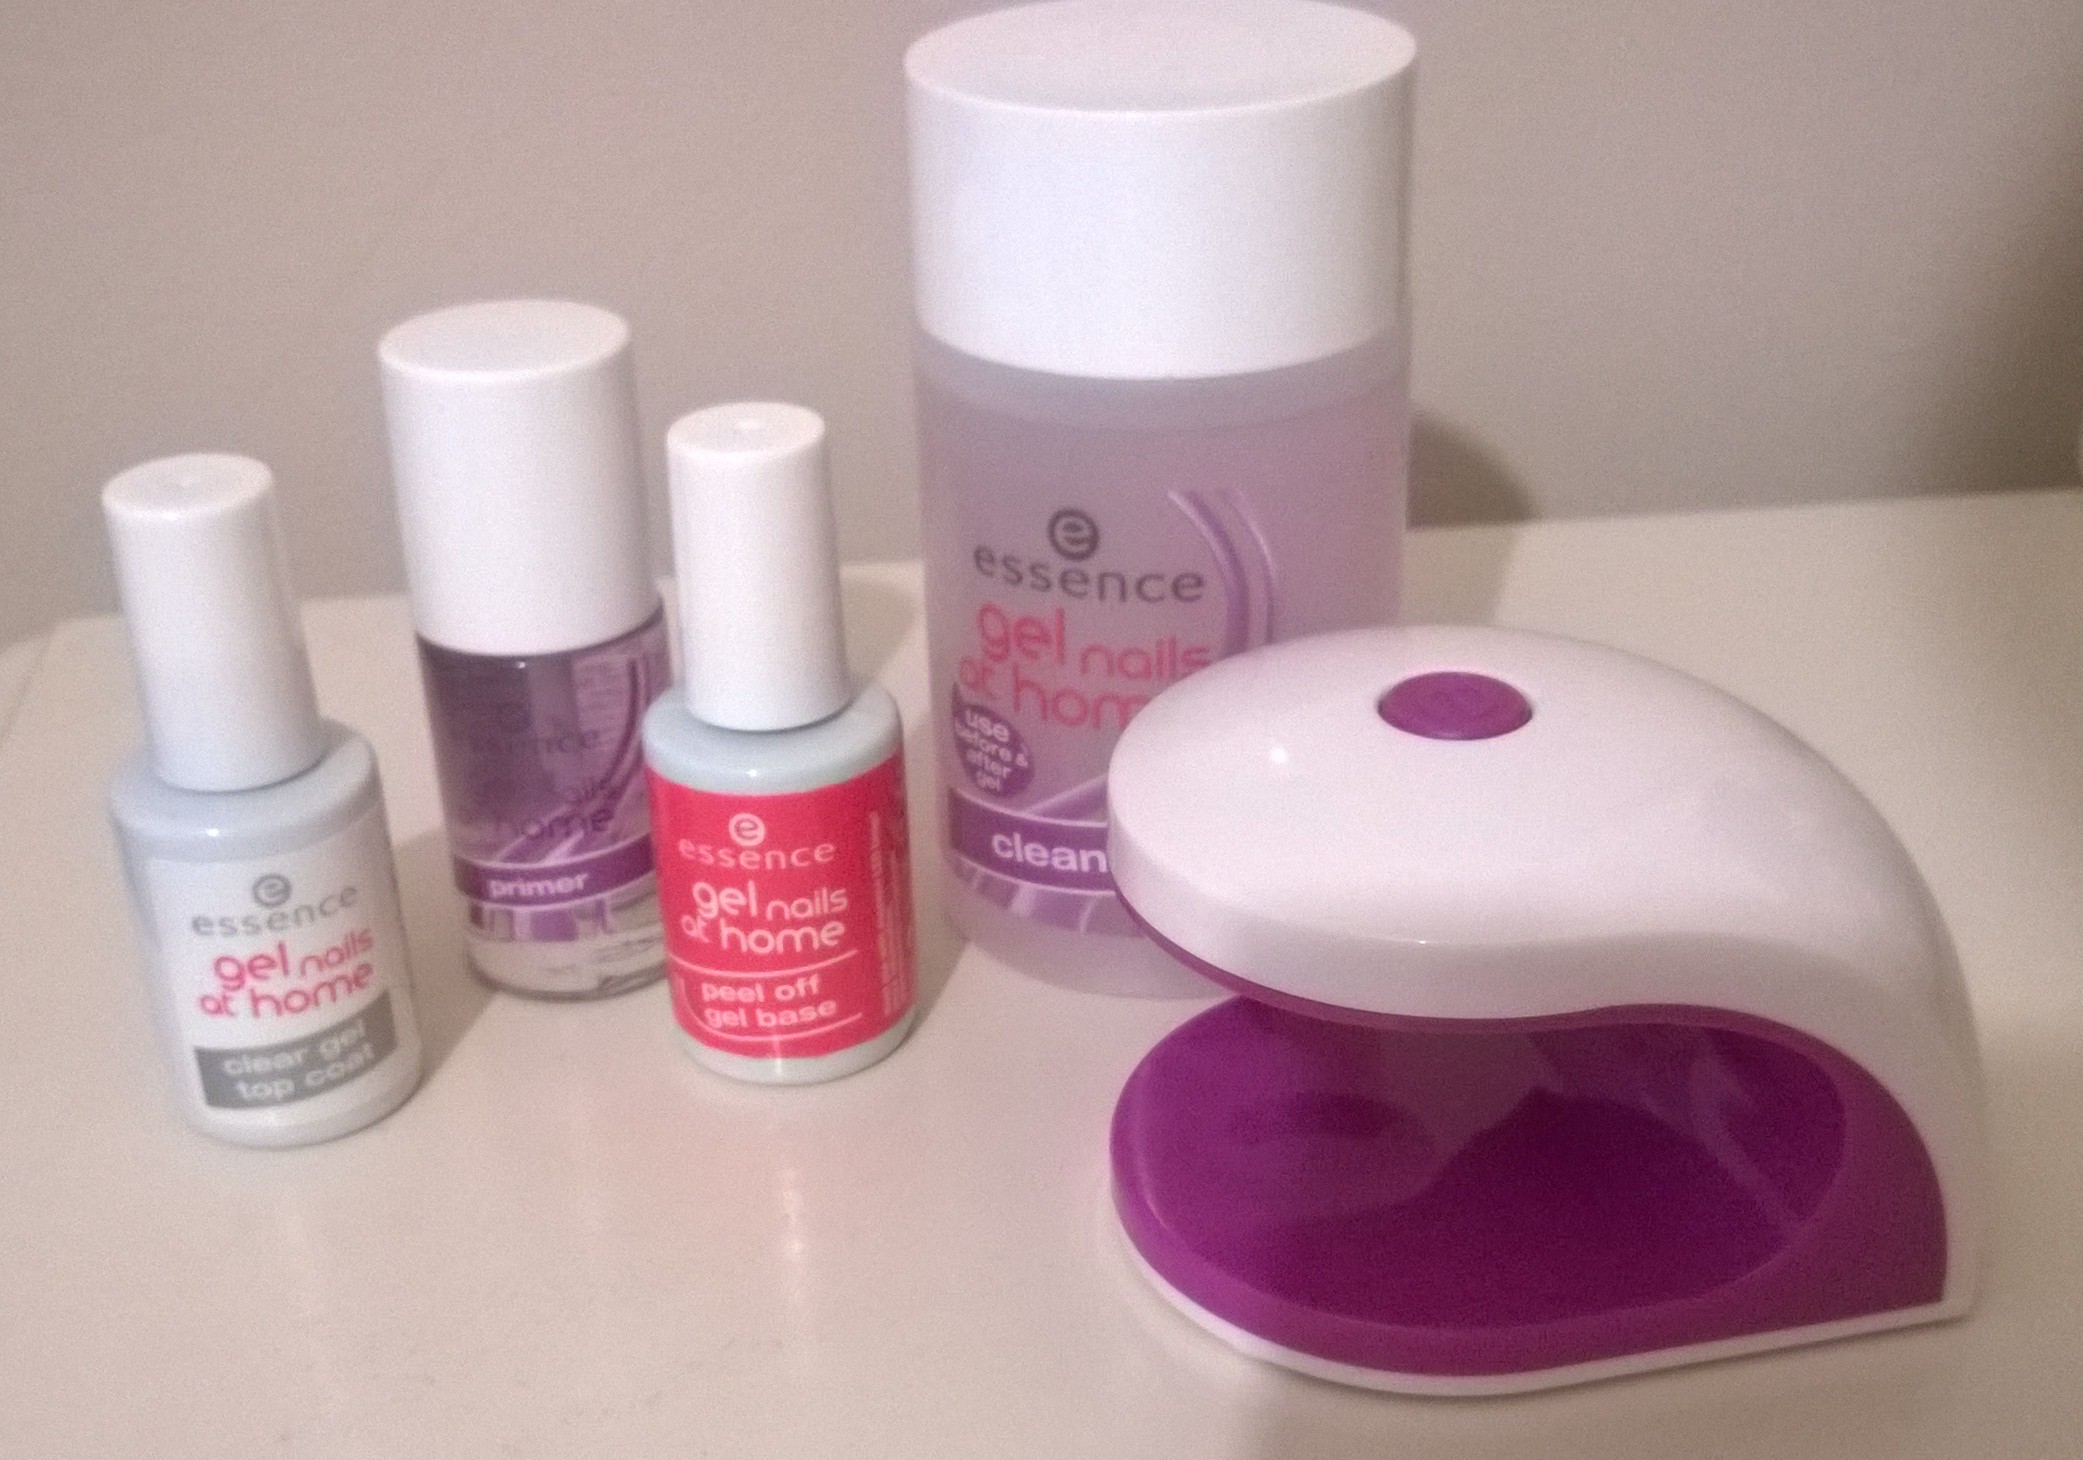 Essence Gel Nails At Home Review And Pictures Ah Sure Tis Lovely